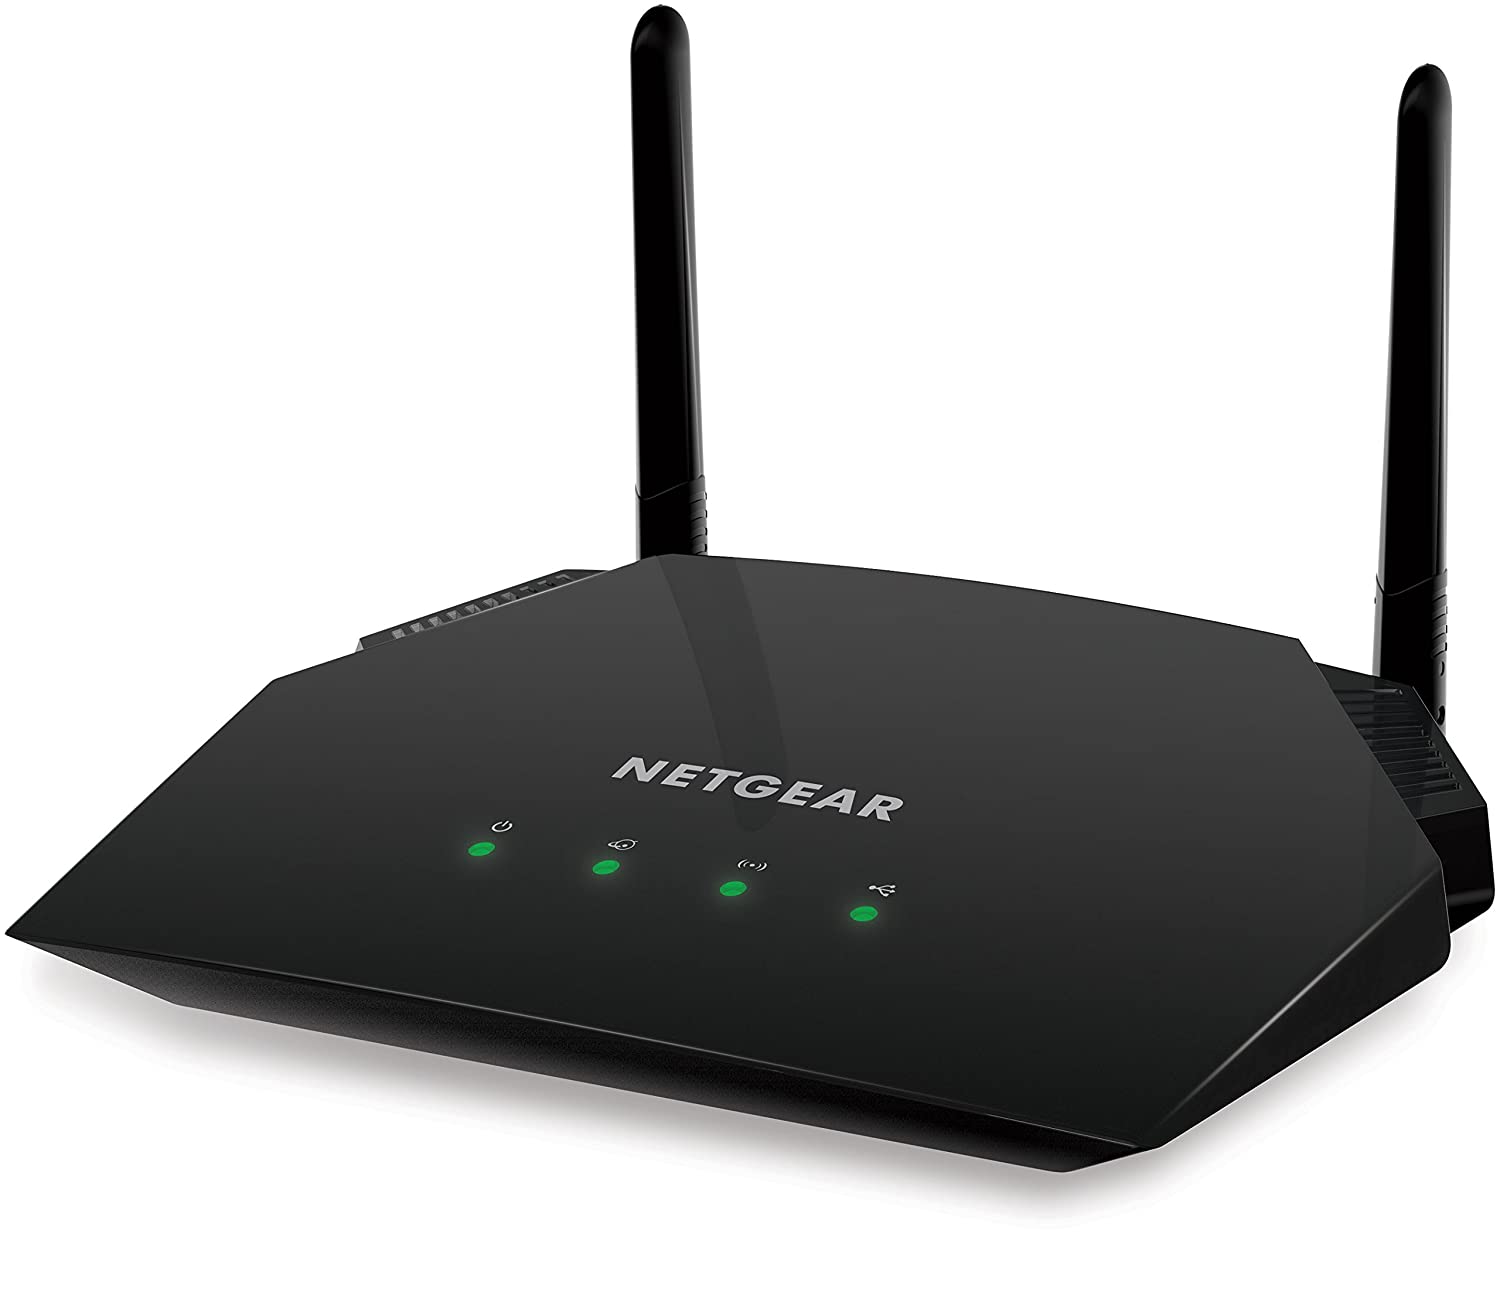 Router : How to Login your Router? - Life2Dreams